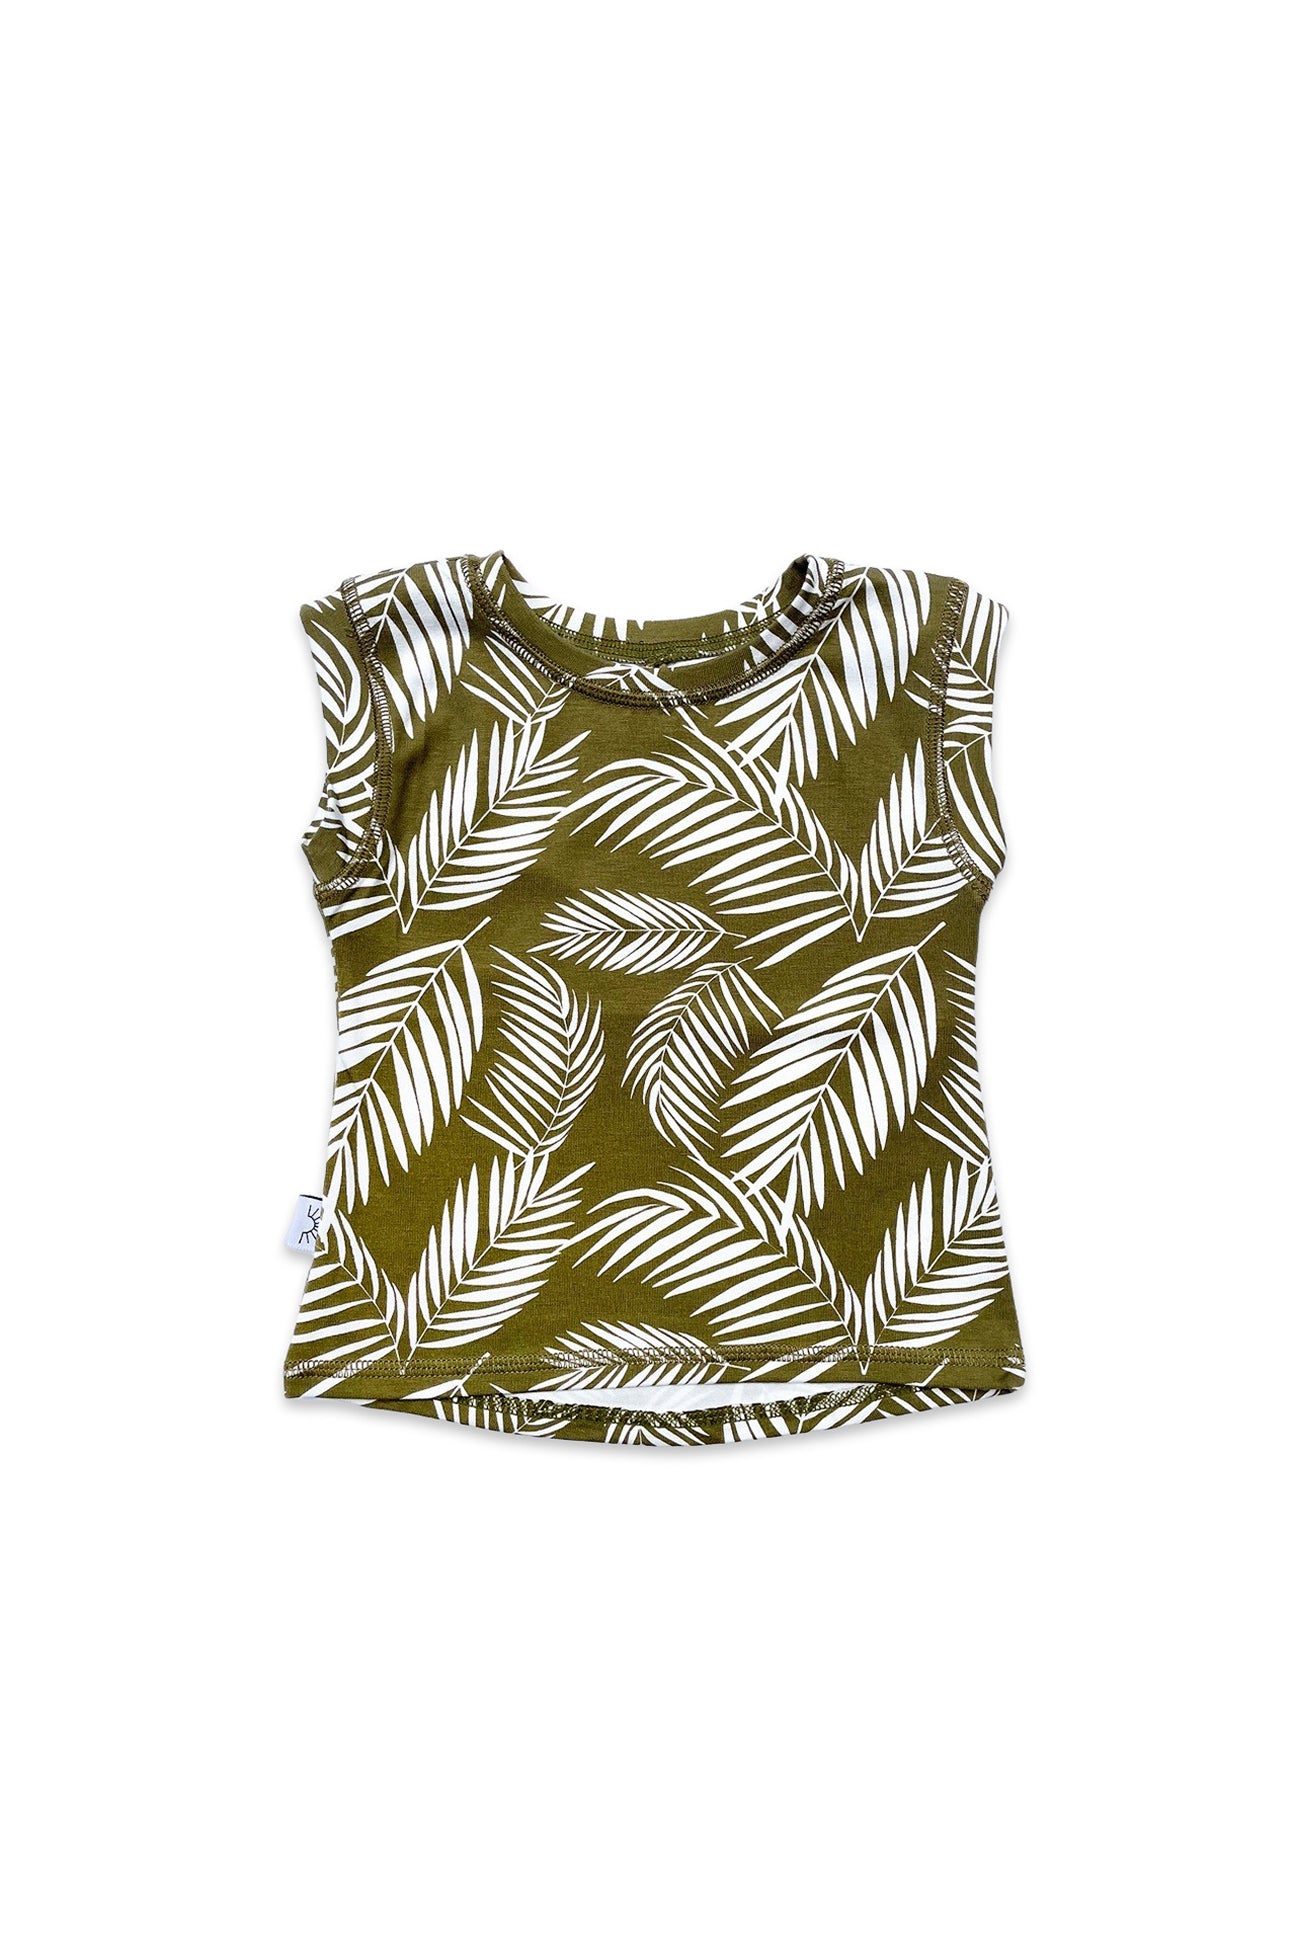 Box Tee - Olive Fronds